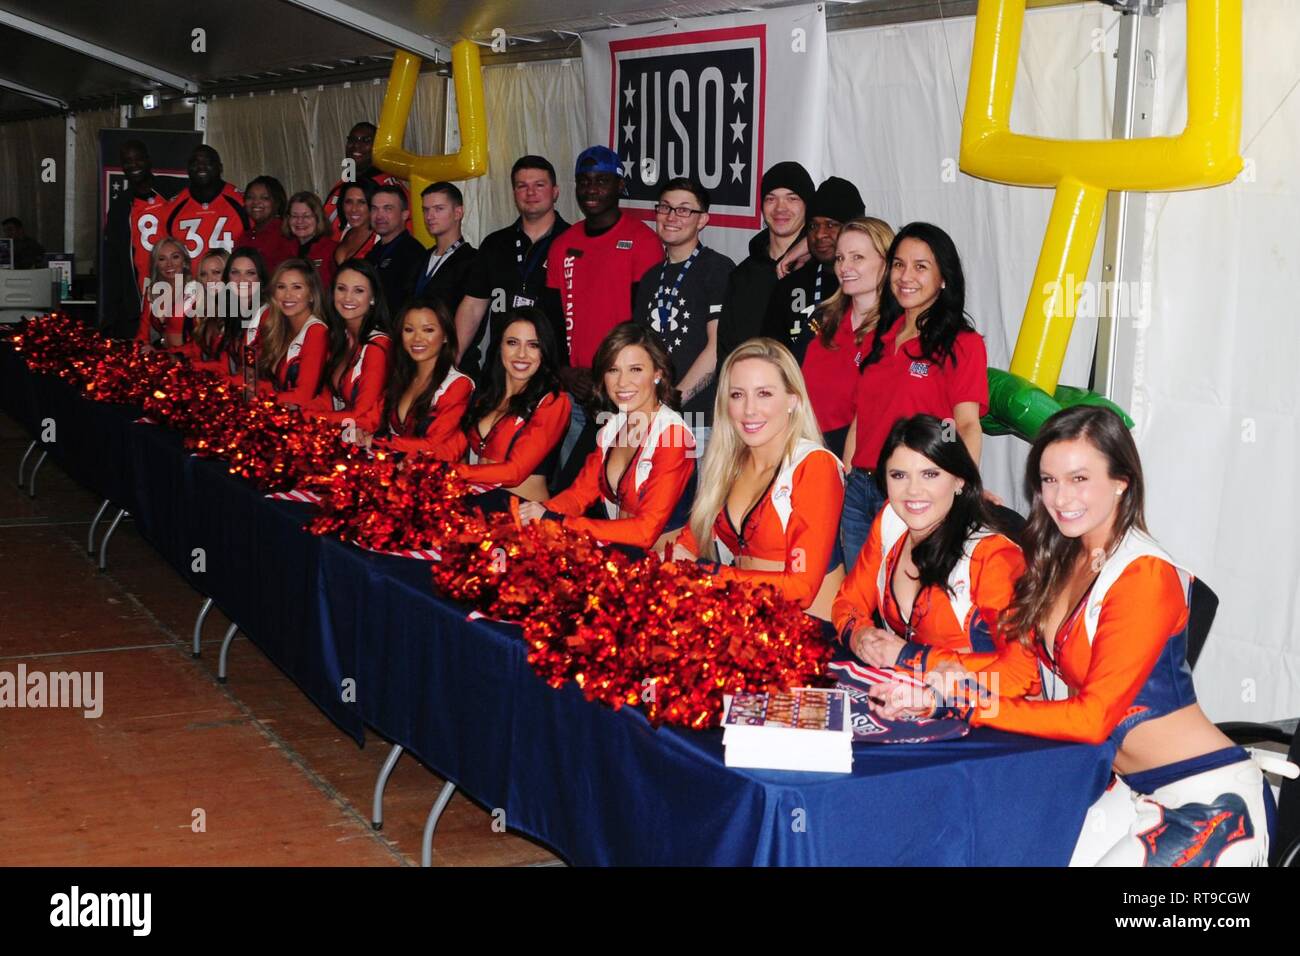 The USO hosts the Denver Broncos cheerleaders, mascot and Alumni football players for a meet and greet with lots of laughs, autographs, smiles and selfies with Soldiers of the 1st Armored Brigade Combat Team, 1st Cavalry Division at Camp Aachen's USO annex in Grafenwoehr, Germany, Jan. 26, 2019. IRONHORSE deployed in support of Atlantic Resolve, an enduring exercise to improve interoperability between U.S. Forces, their NATO allies and partners. Stock Photo